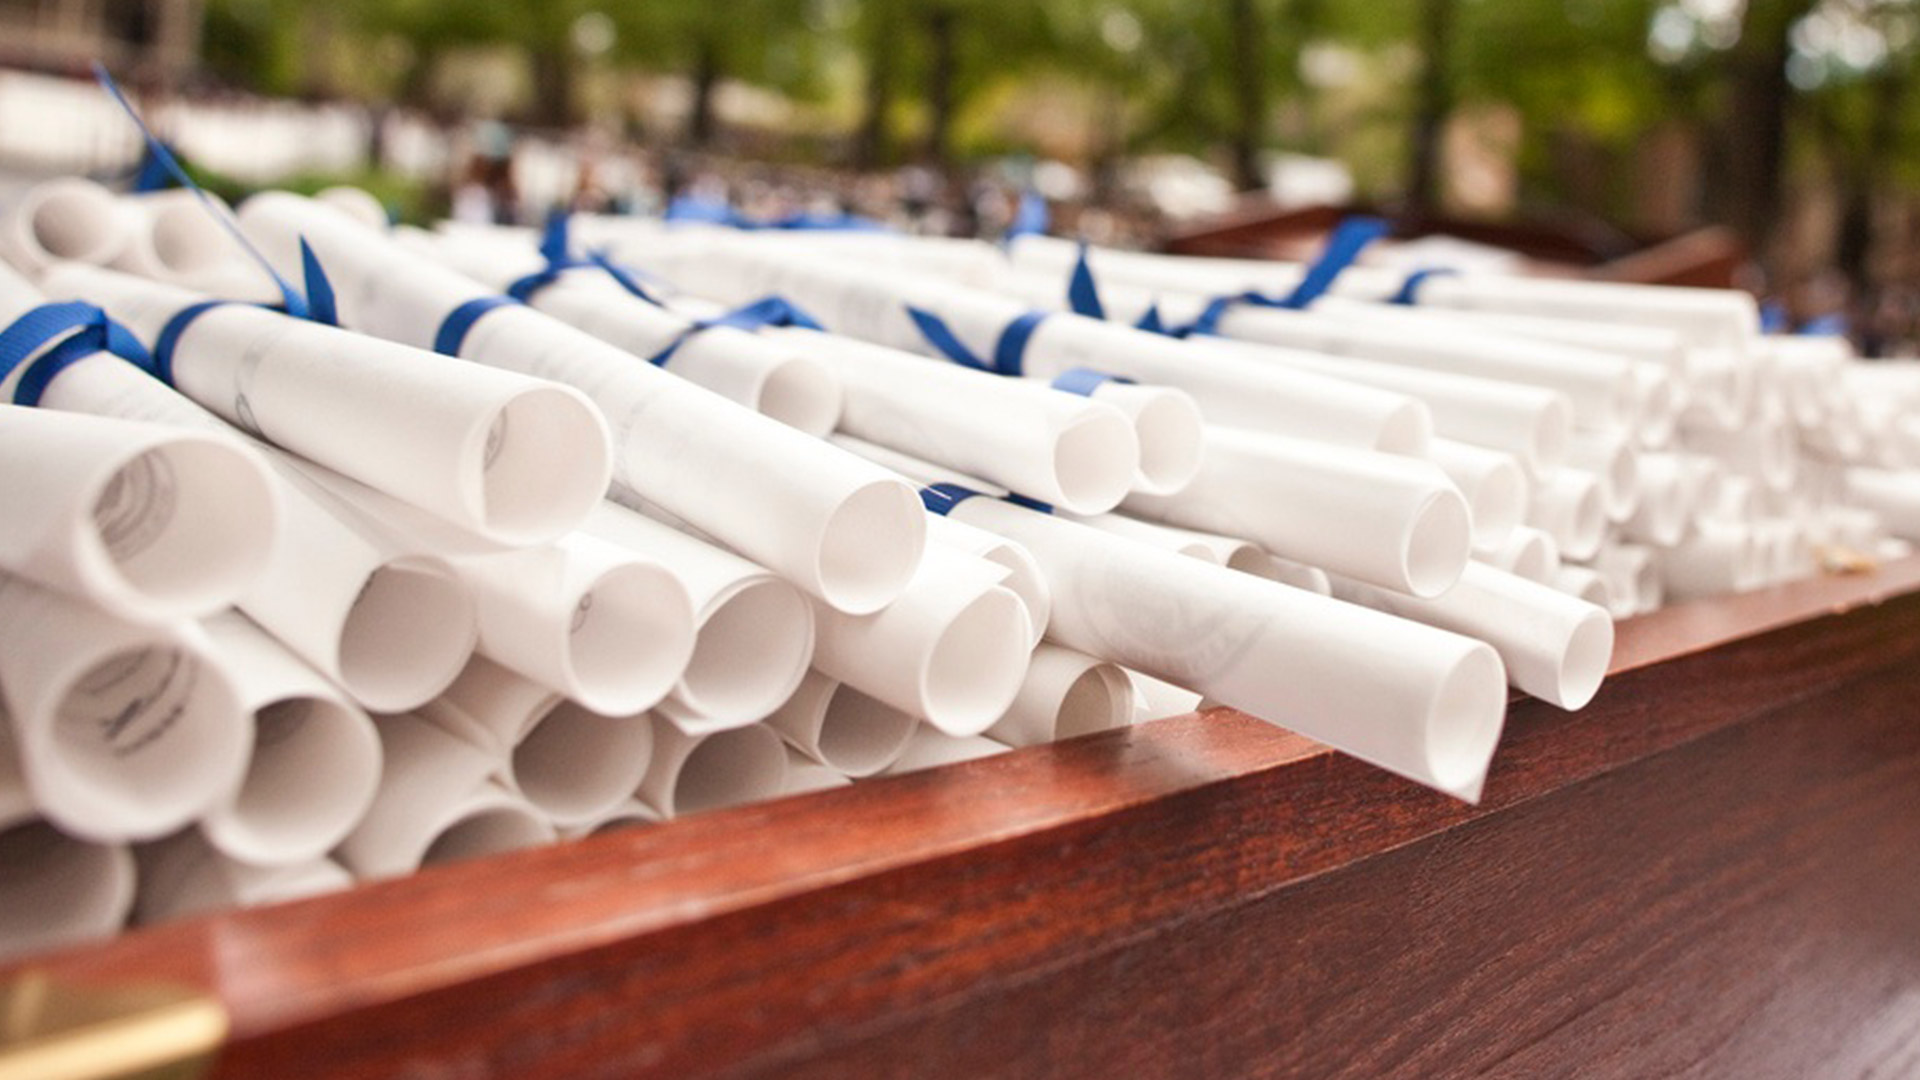 A pile of rolled up diplomas, each with a blue ribbon, sit on a desk.